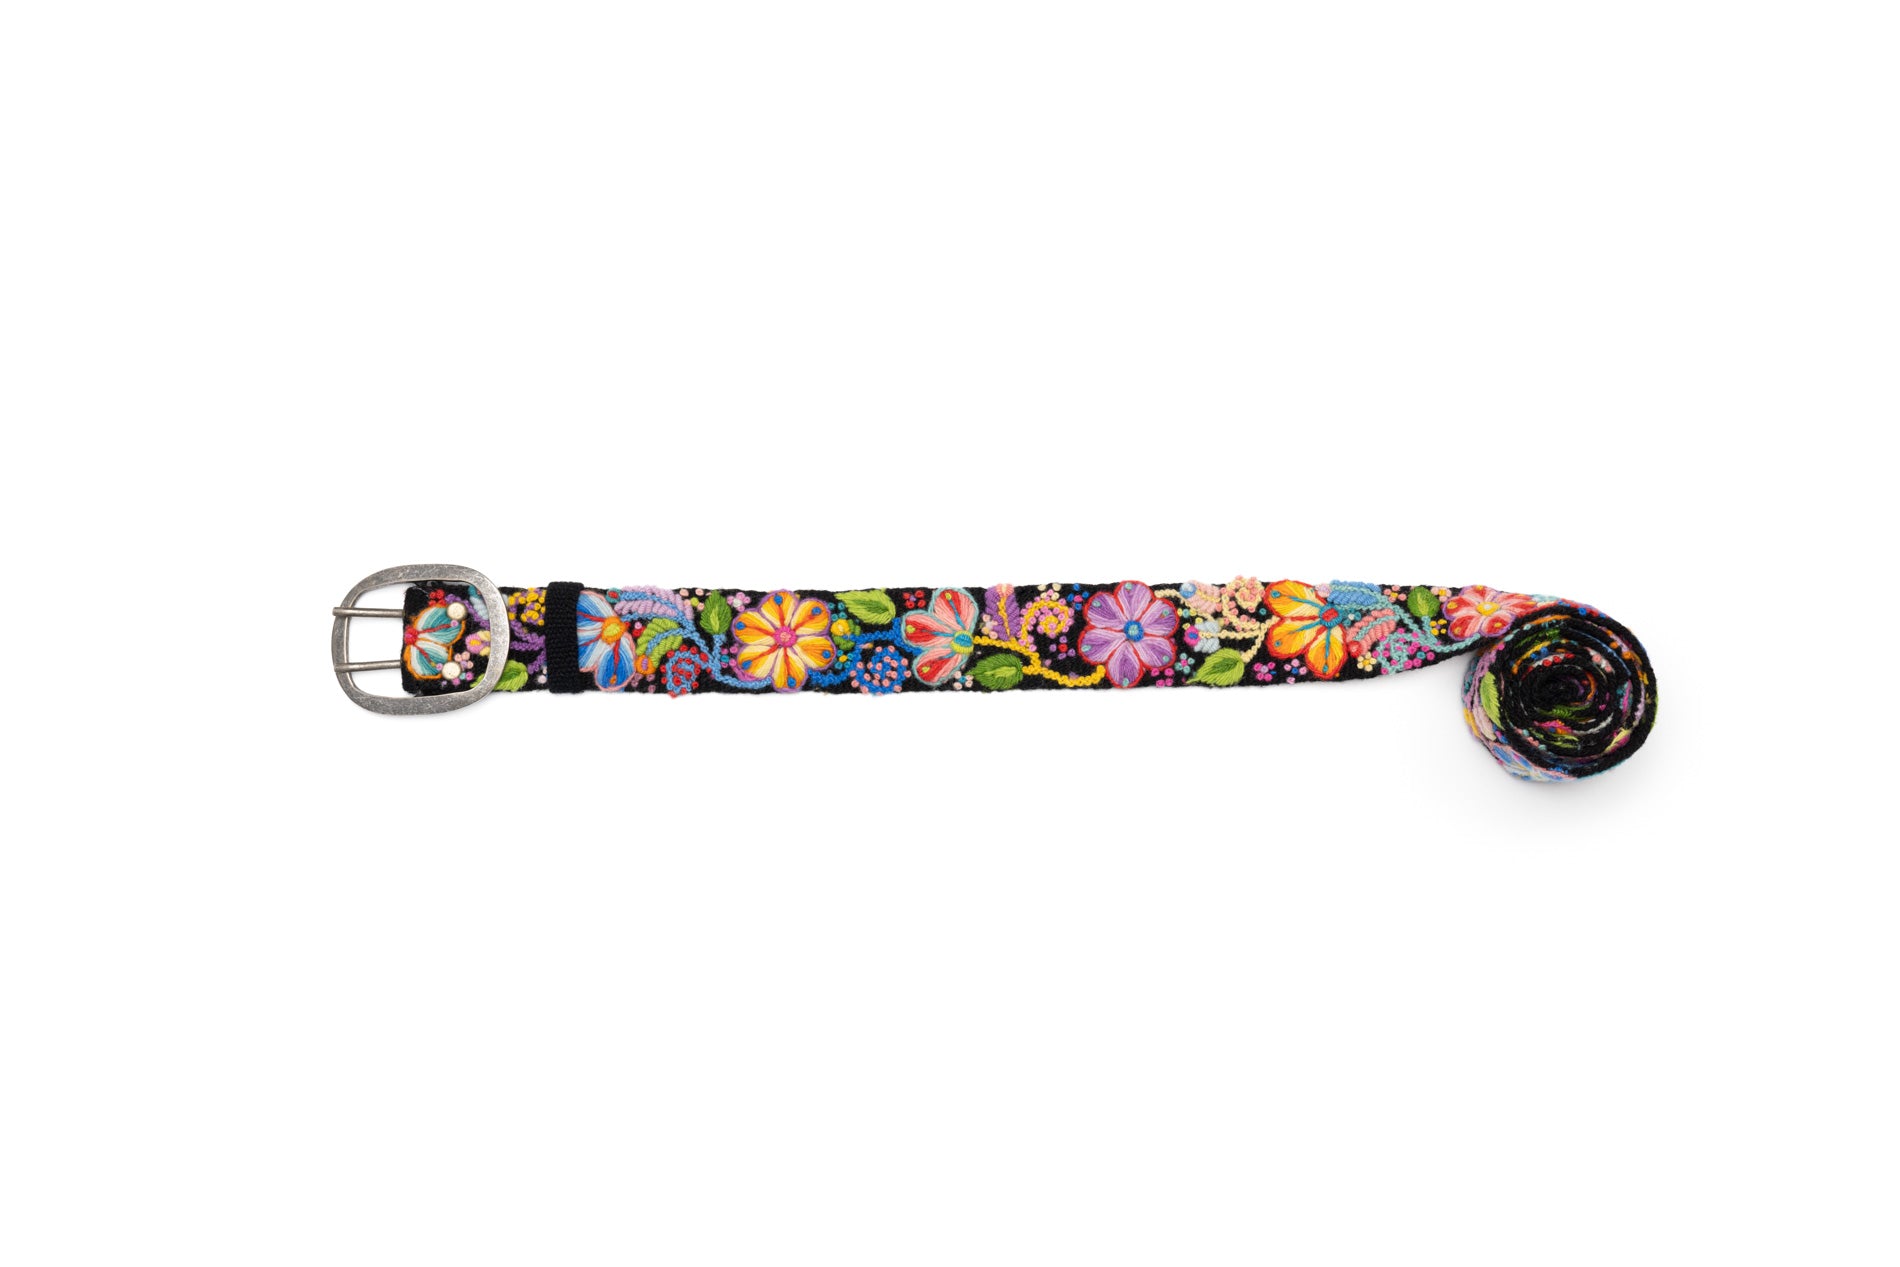 Hand-loomed Black Floral Belt, hand embroidered by Andean artisans. Sizes: S (35), M (41), L (47), XL (50). From Madeline Parks Designs.